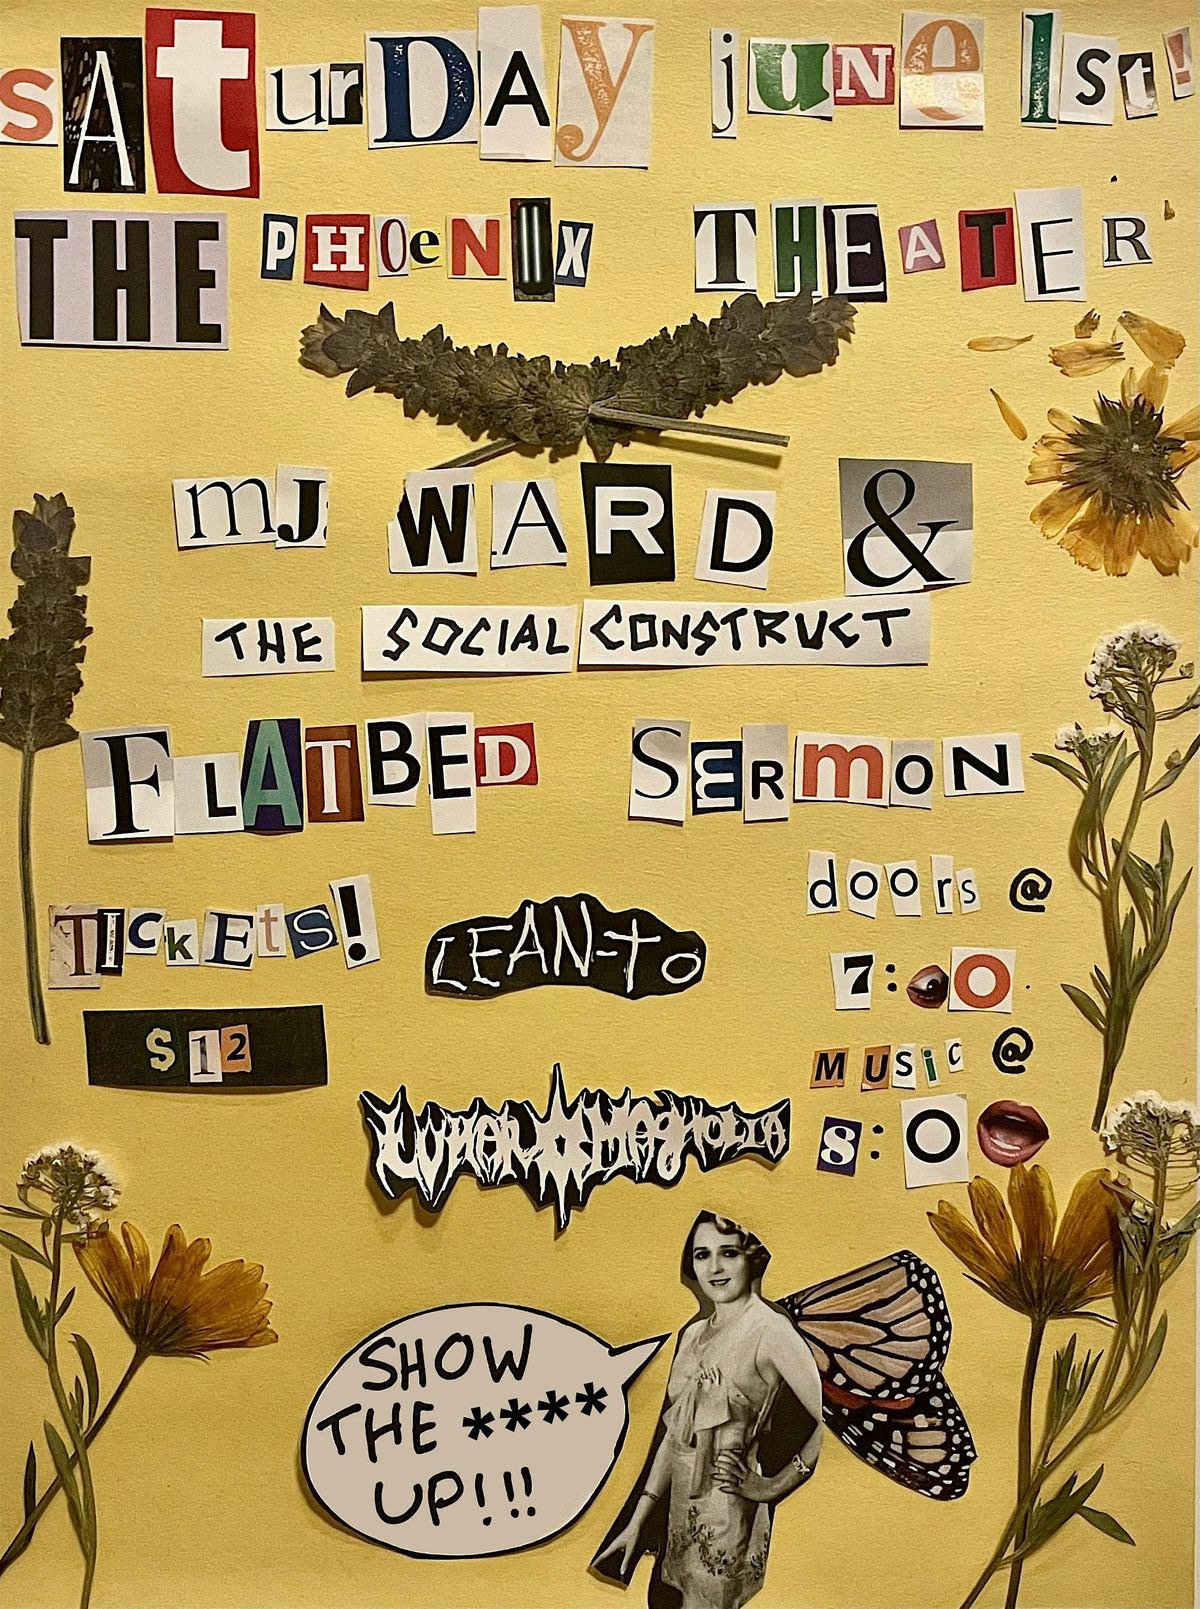 MJ Ward and The Social Construct, Flatbed Sermon, Lean-To, Lunar Magnolia